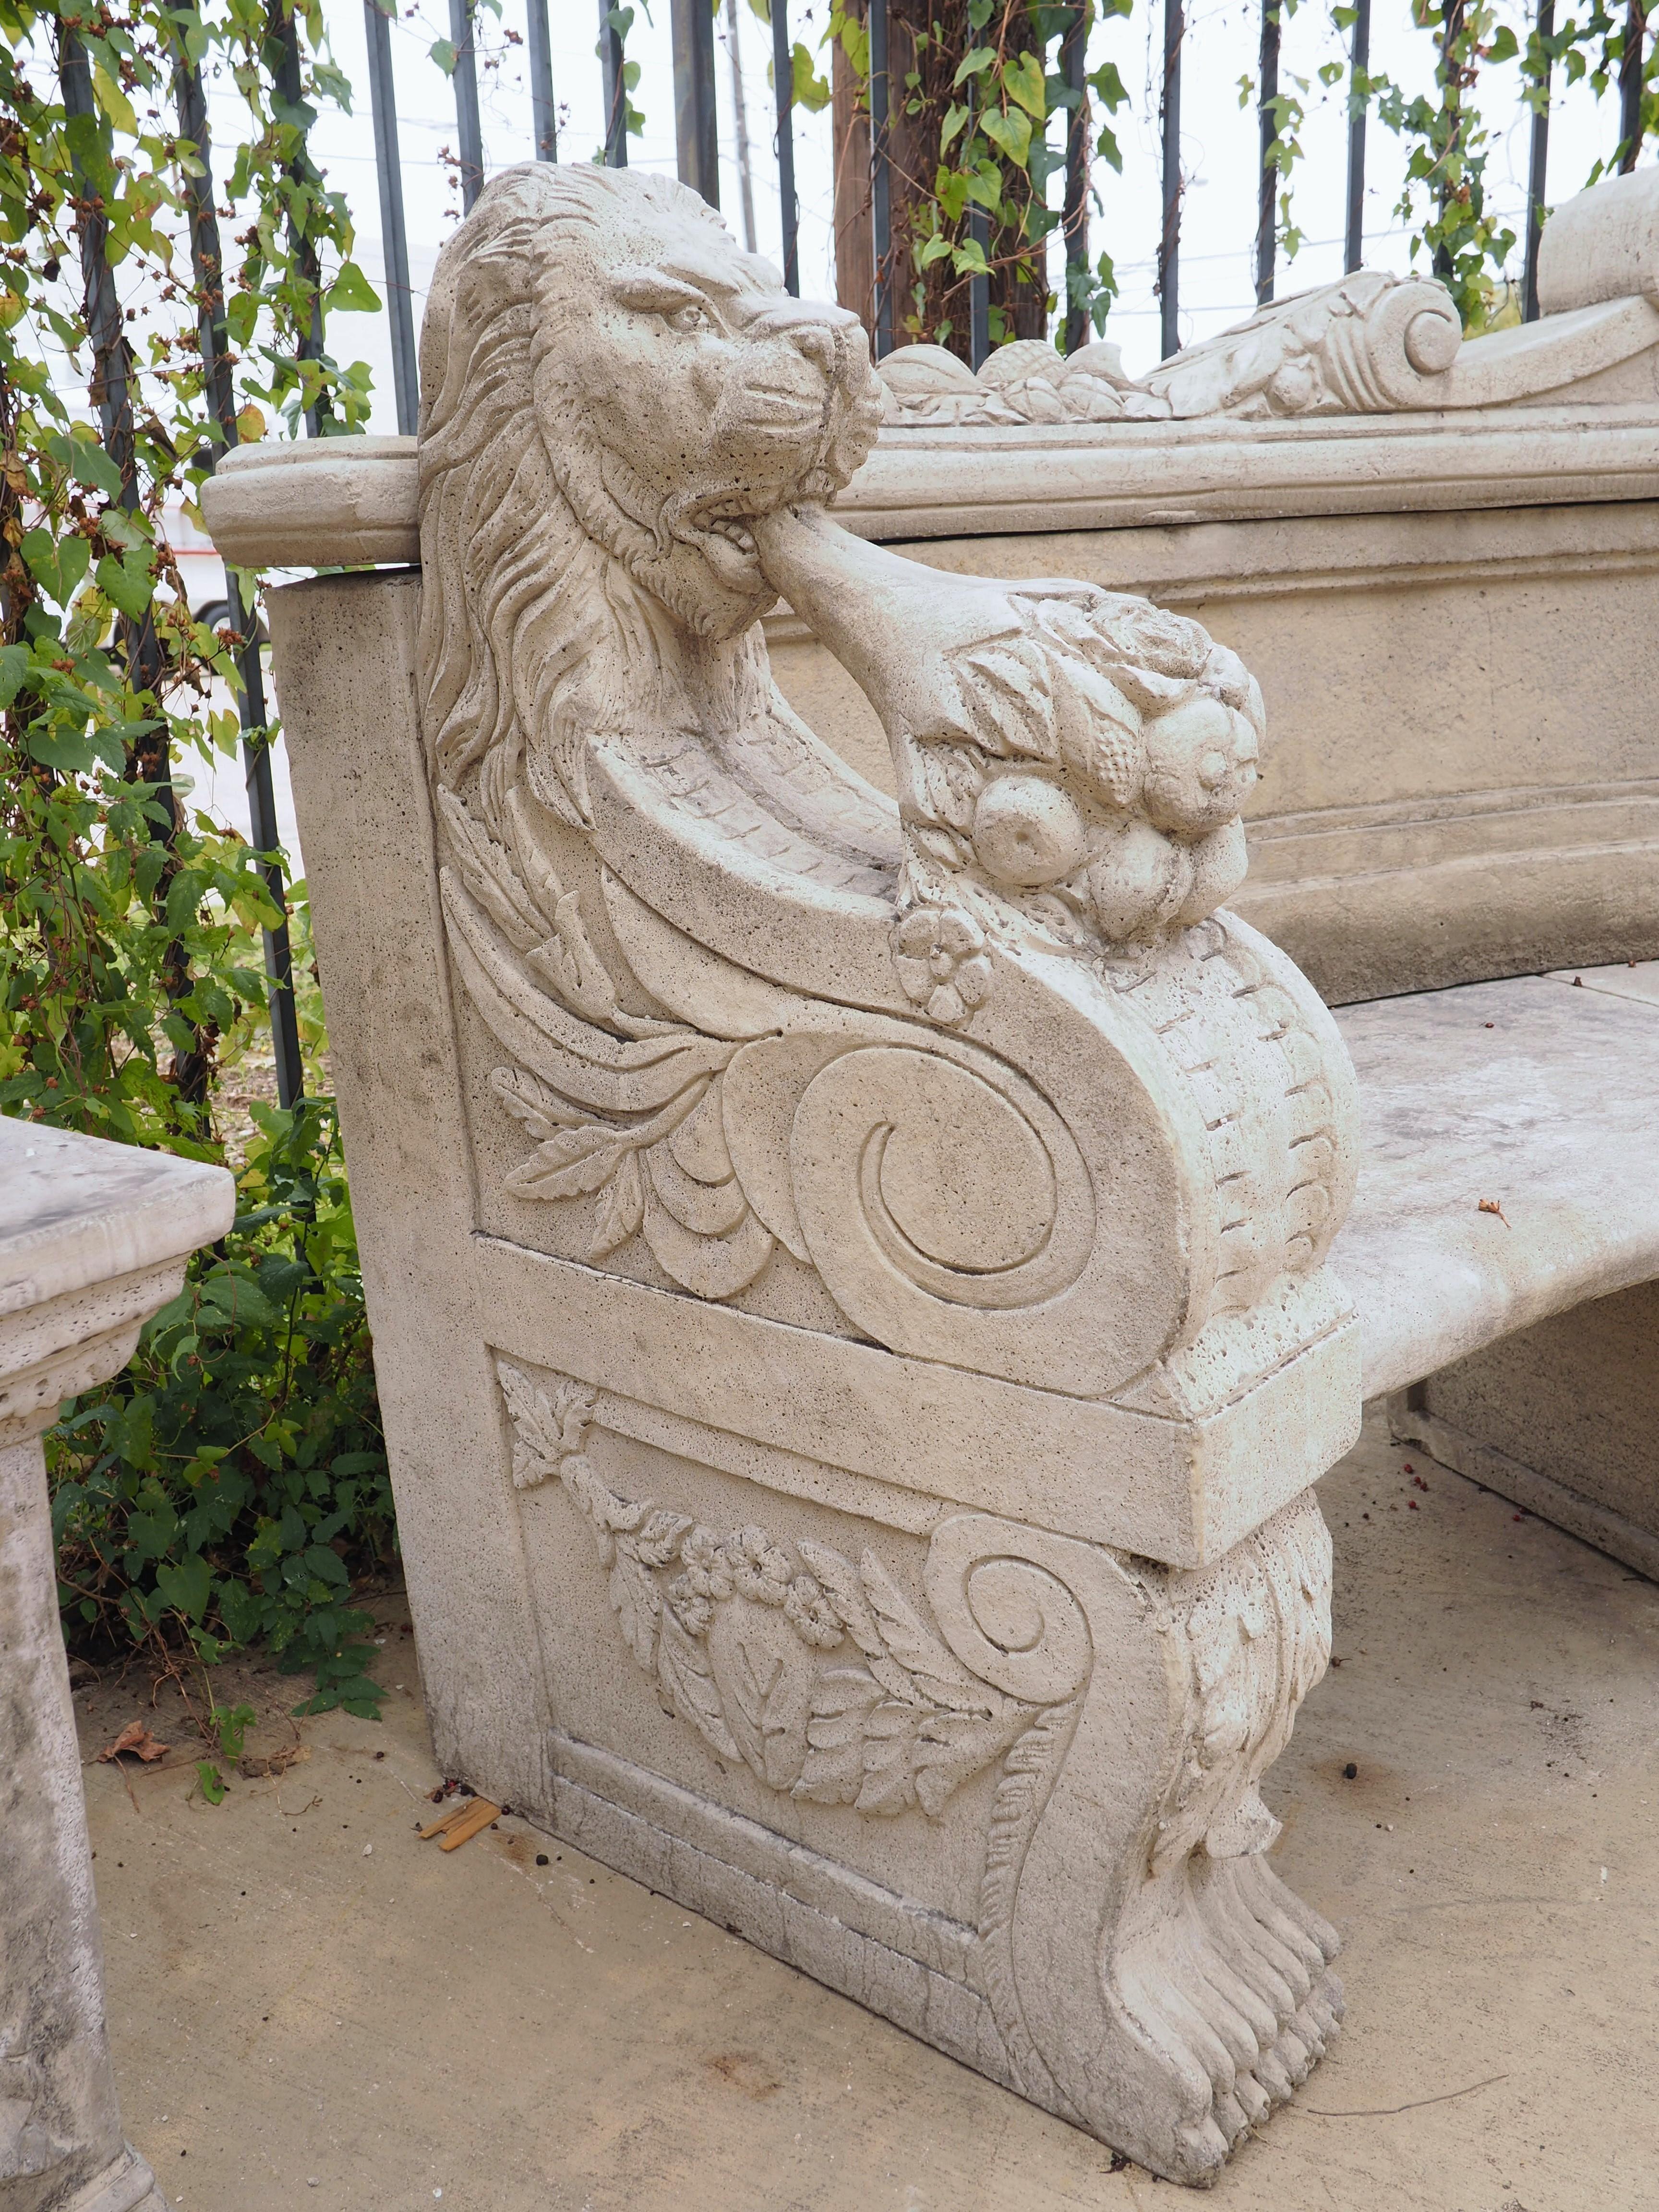 Consisting of 13 pieces of cast stone, this garden bench from Northern France has motifs of the Neoclassical style. Each of the light gray colored stones was cast using a separate mold, with elements that invoke the classic “Italian style”.

The